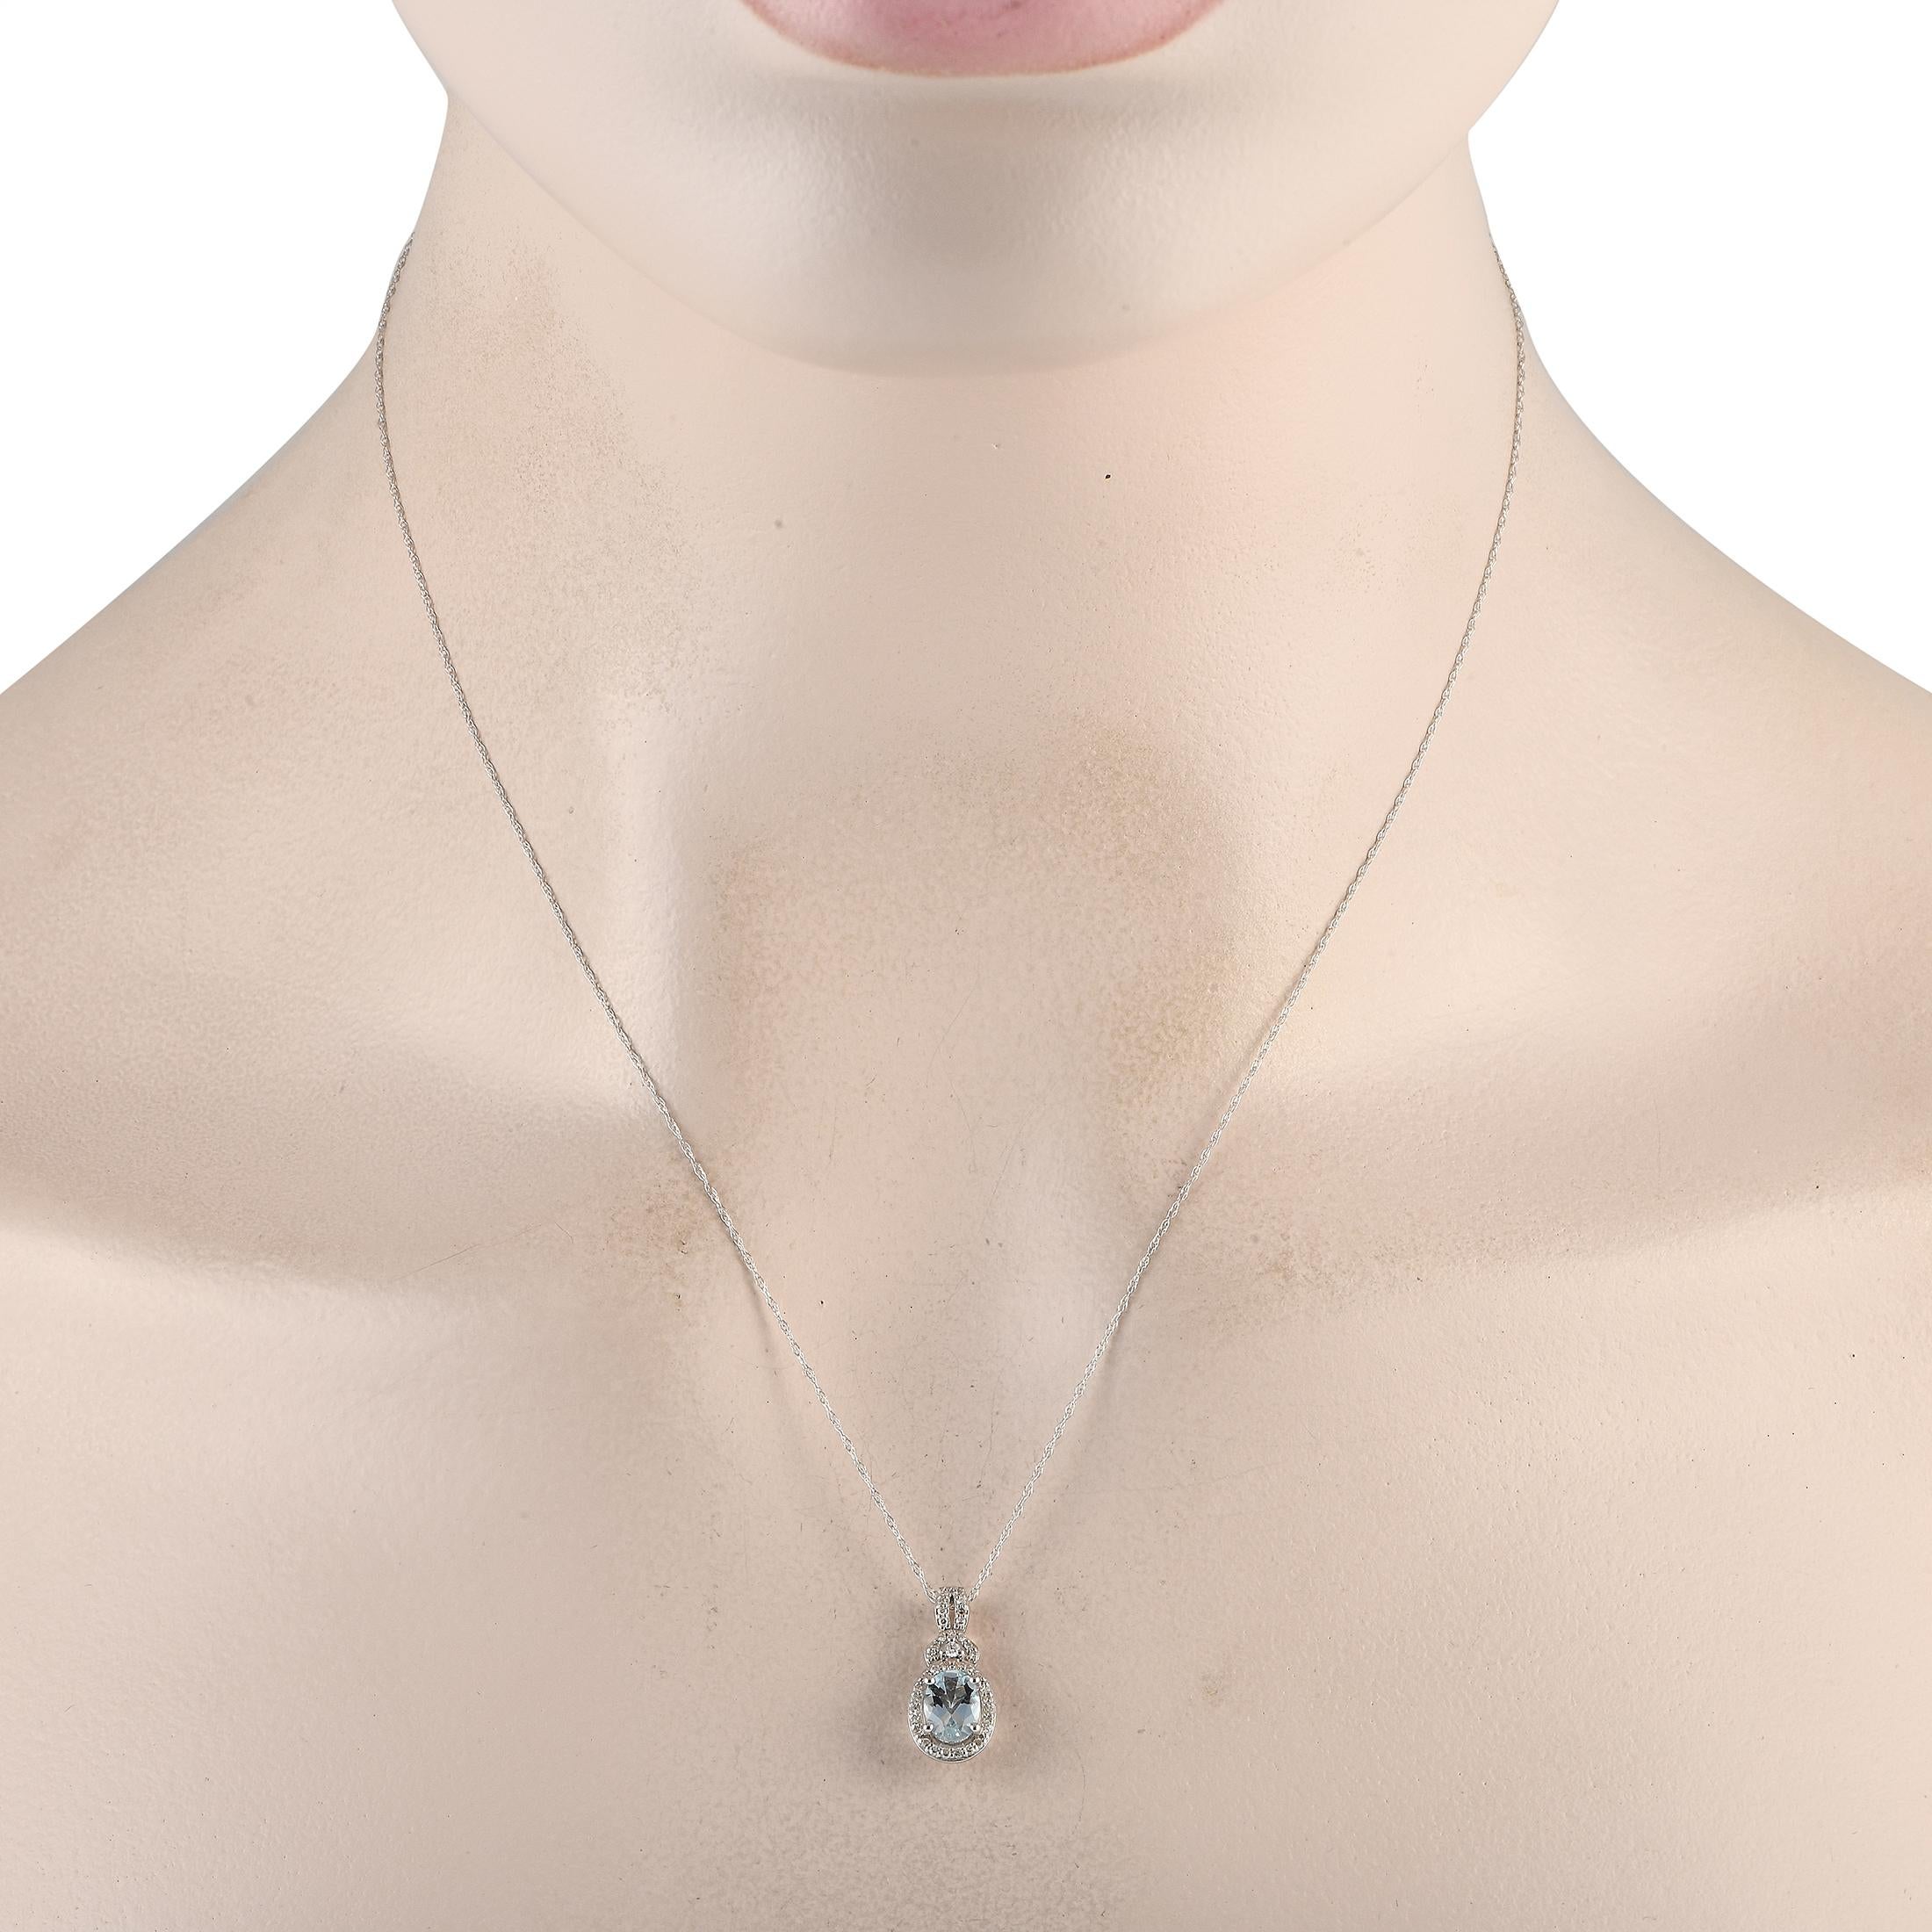 This exquisite necklace is ideal for anyone with a minimalist sense of style. The radiant pendant shines to life thanks to a subtle aquamarine center stone and sparkling diamonds totaling 0.15 carats. Crafted from 14K white gold, the pendant